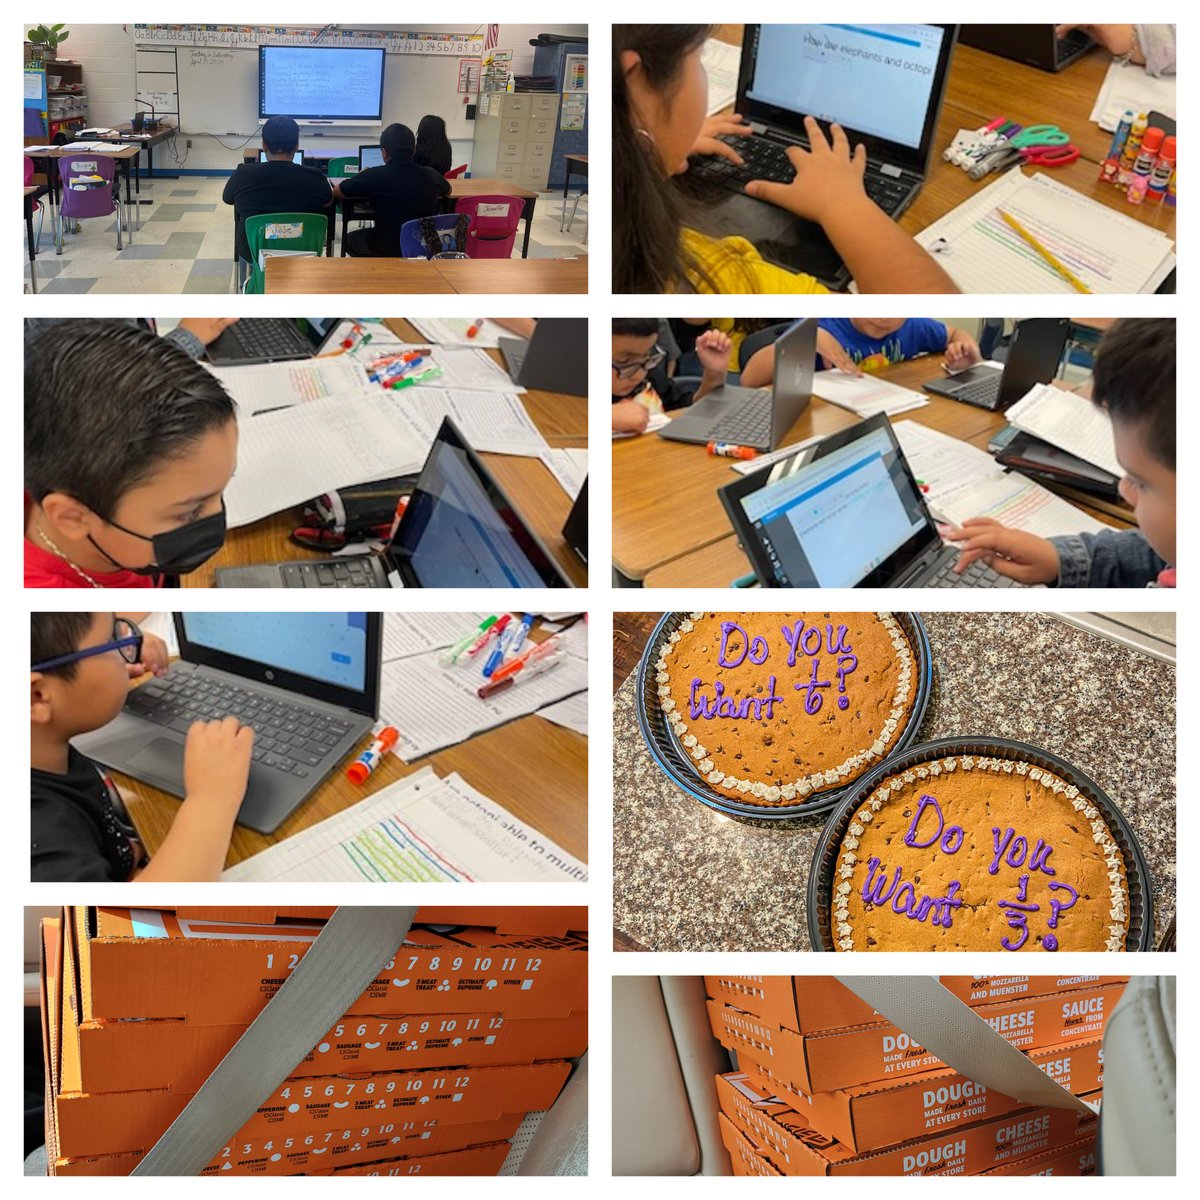 We want to thank the 48 Navigators who attended today's Saturday Quest. We also want to thank our outstanding teachers, librarian, paras, & Kindergarten Granny who took time out their weekend to tutor our kids. Thank you Garcia parents for your support. Here's a few pics. @CCISD